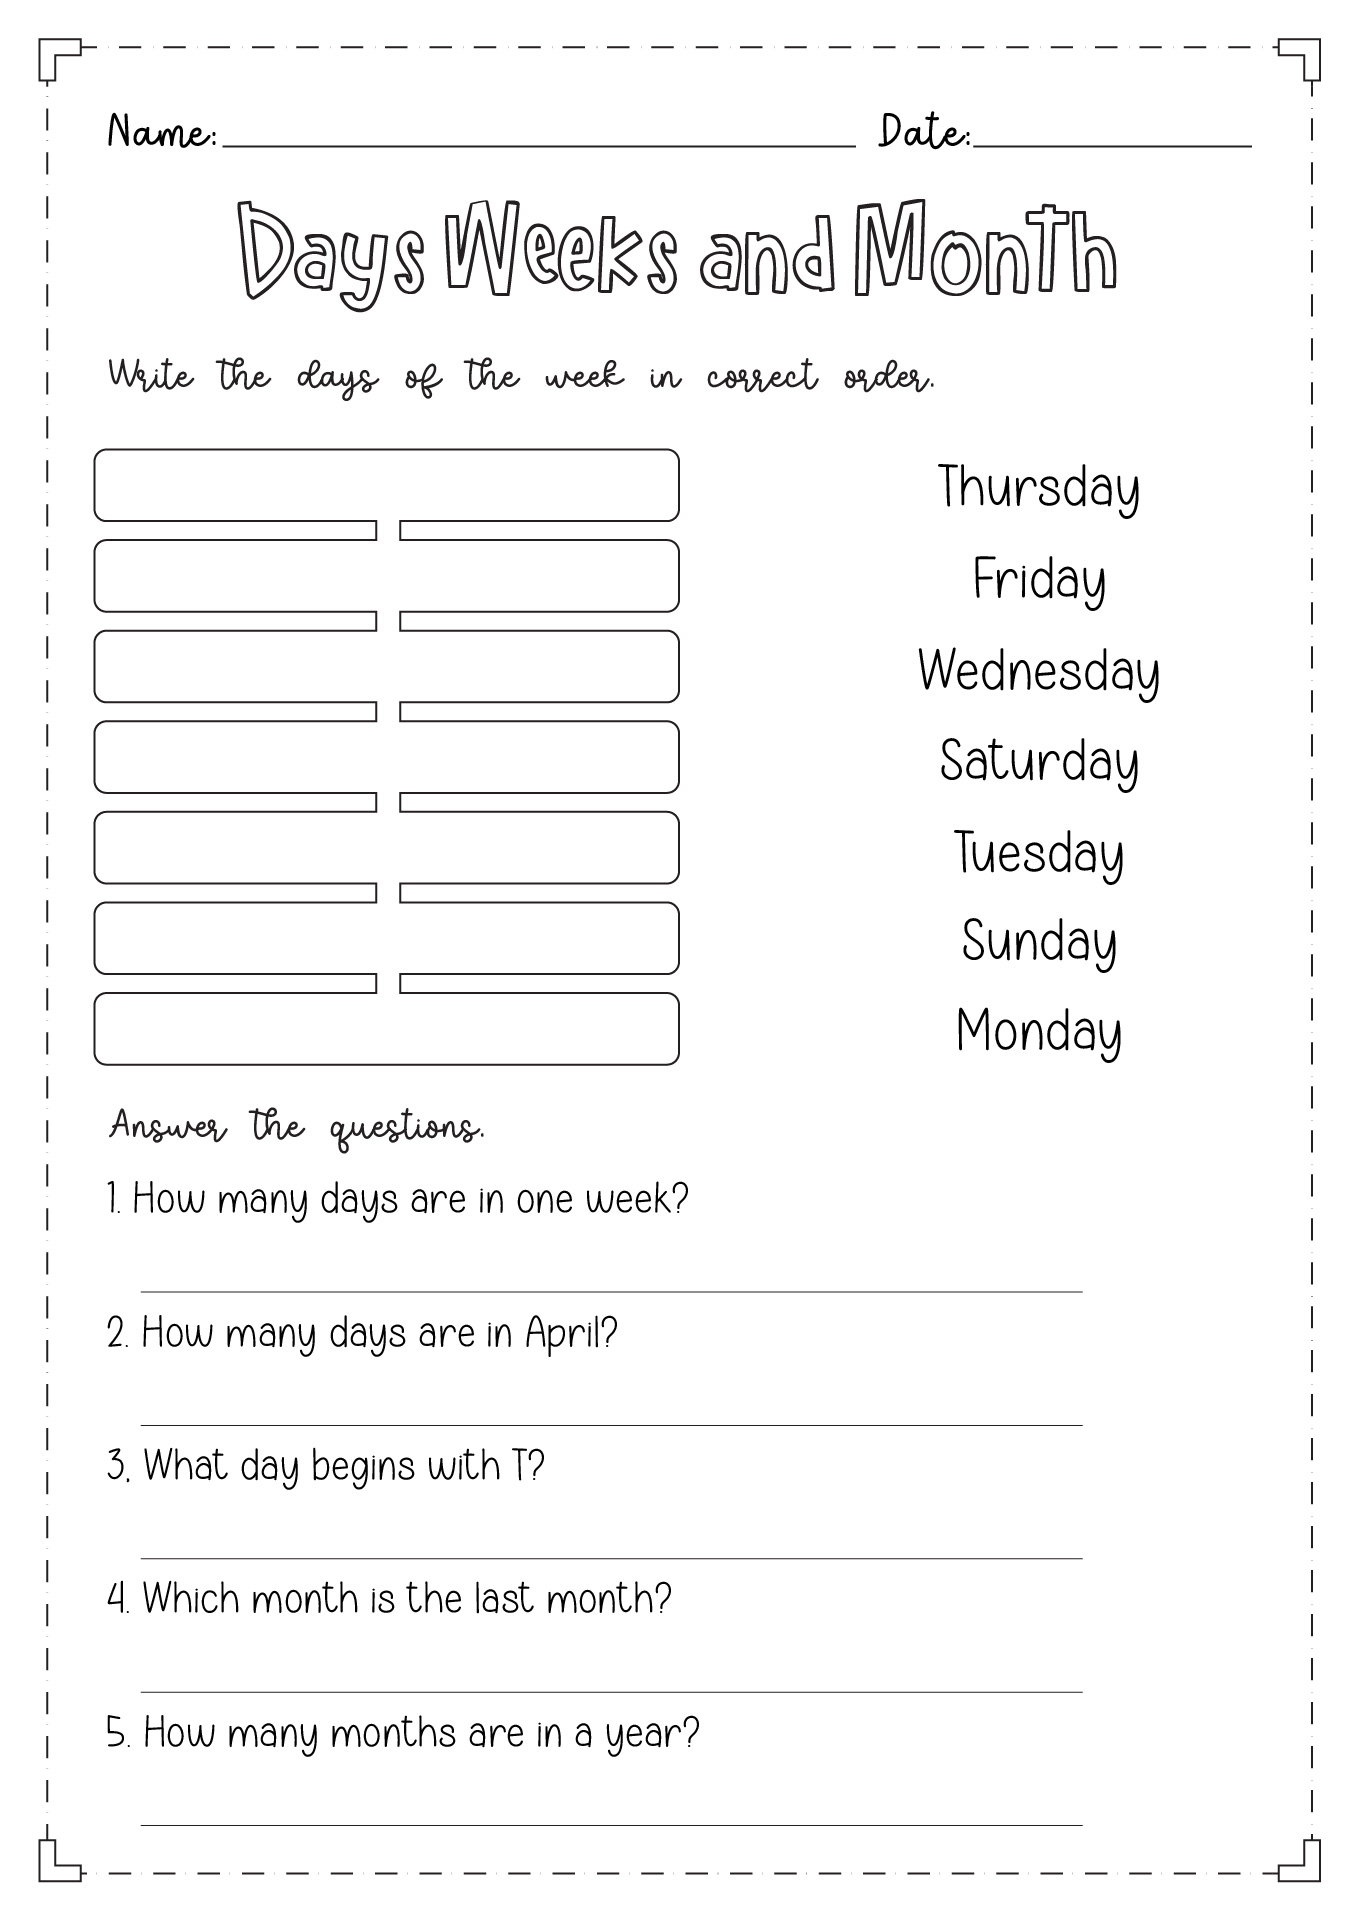 Days Weeks and Month Worksheets